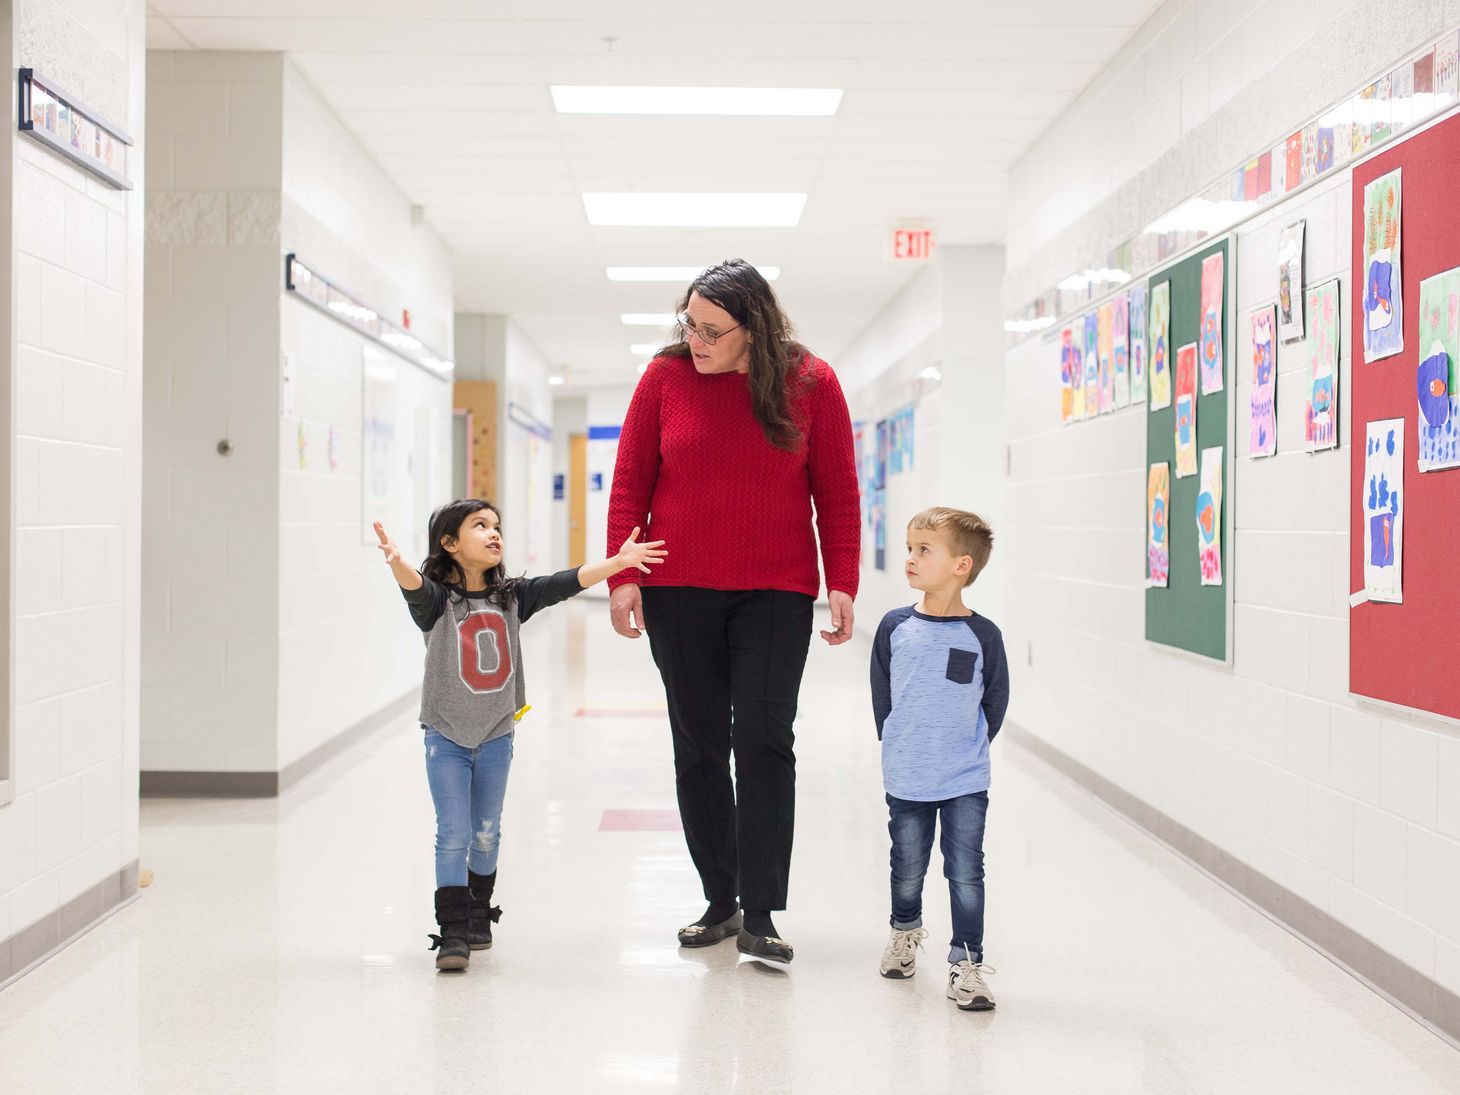 school nurse walking down hallway with two young students